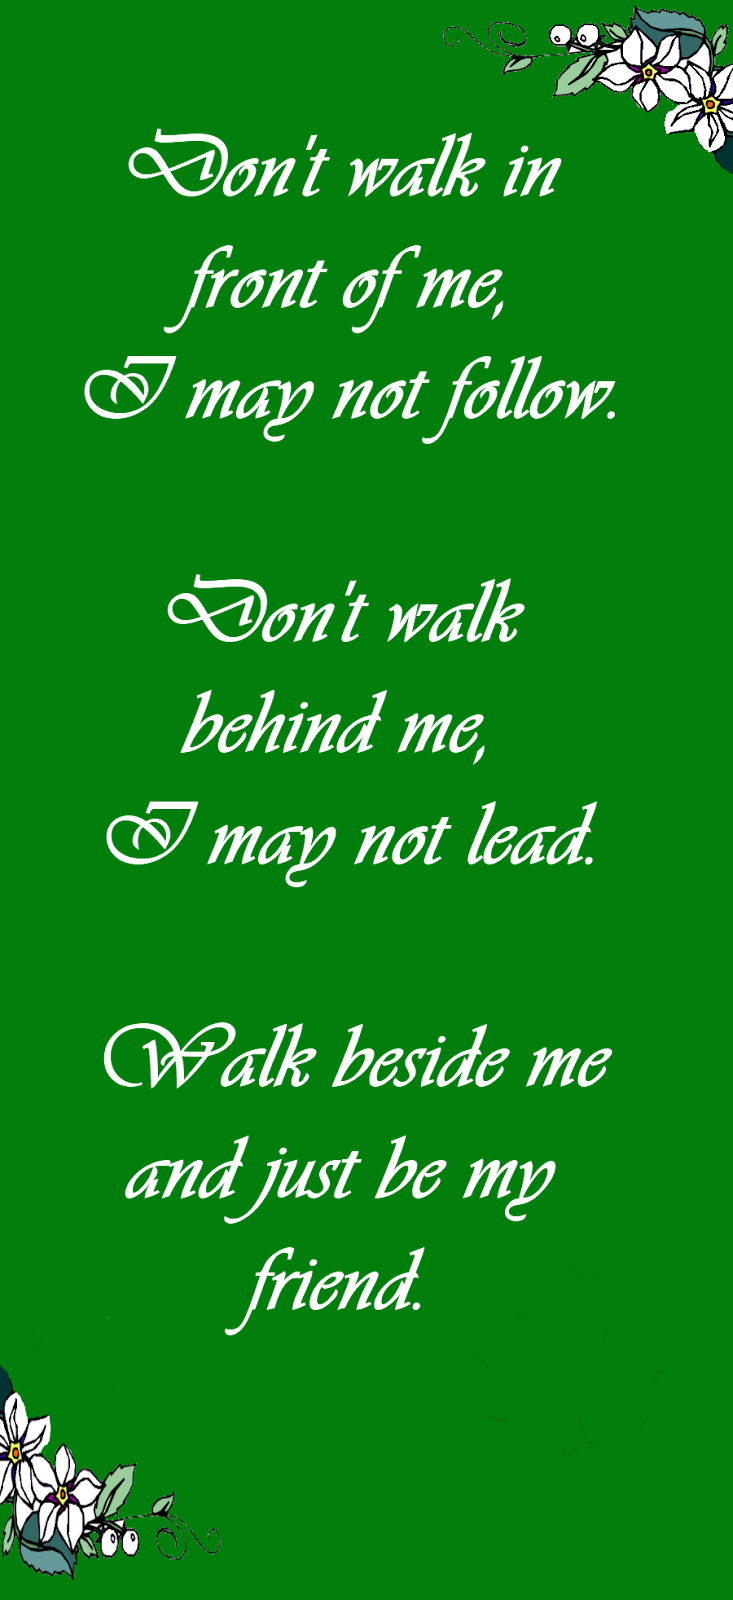 Irish Quotes About Friendship 20